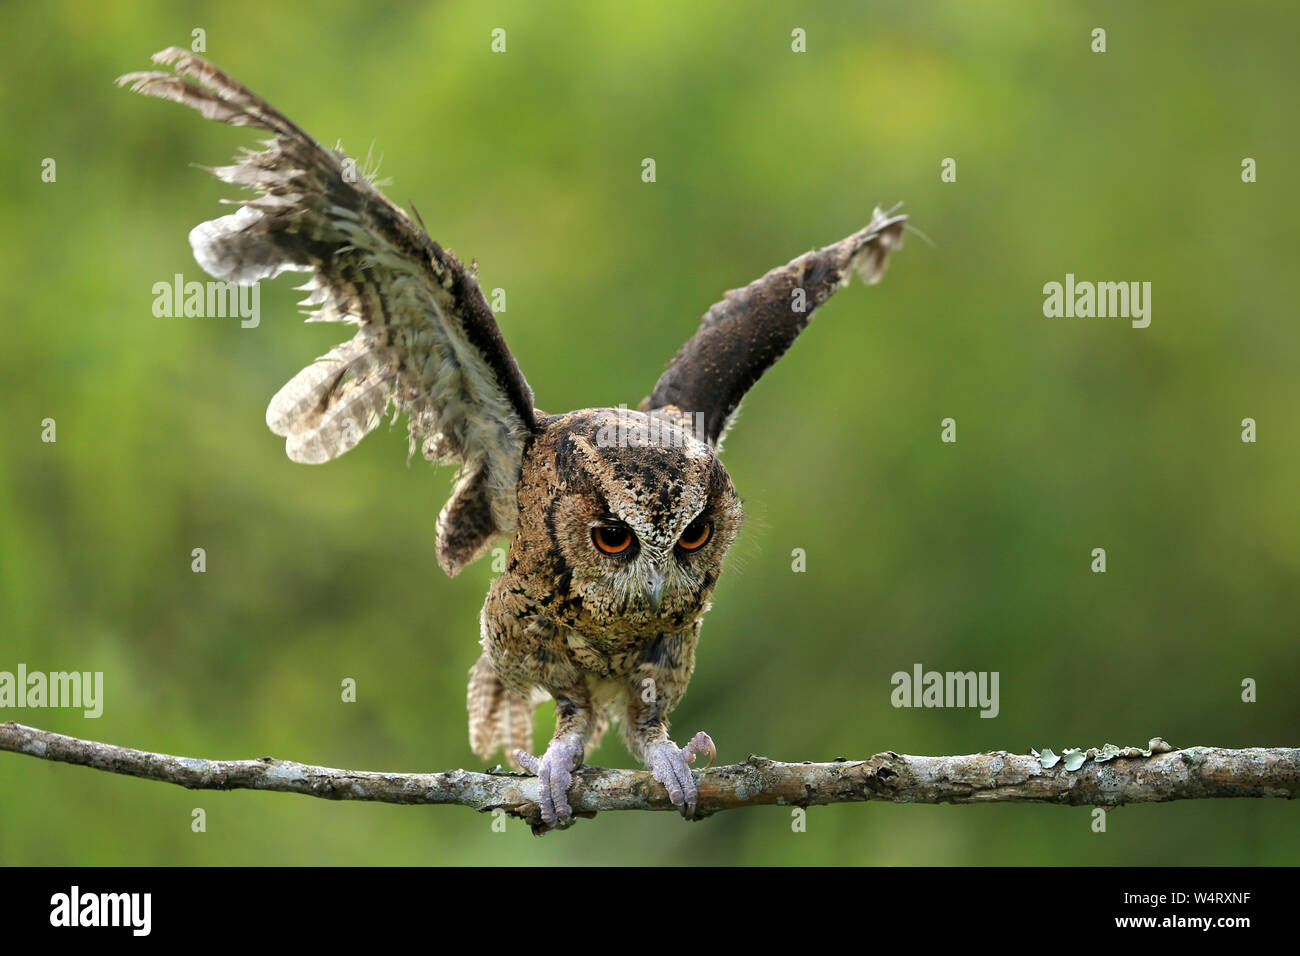 Portrait of an owl taking off, Indonesia Stock Photo